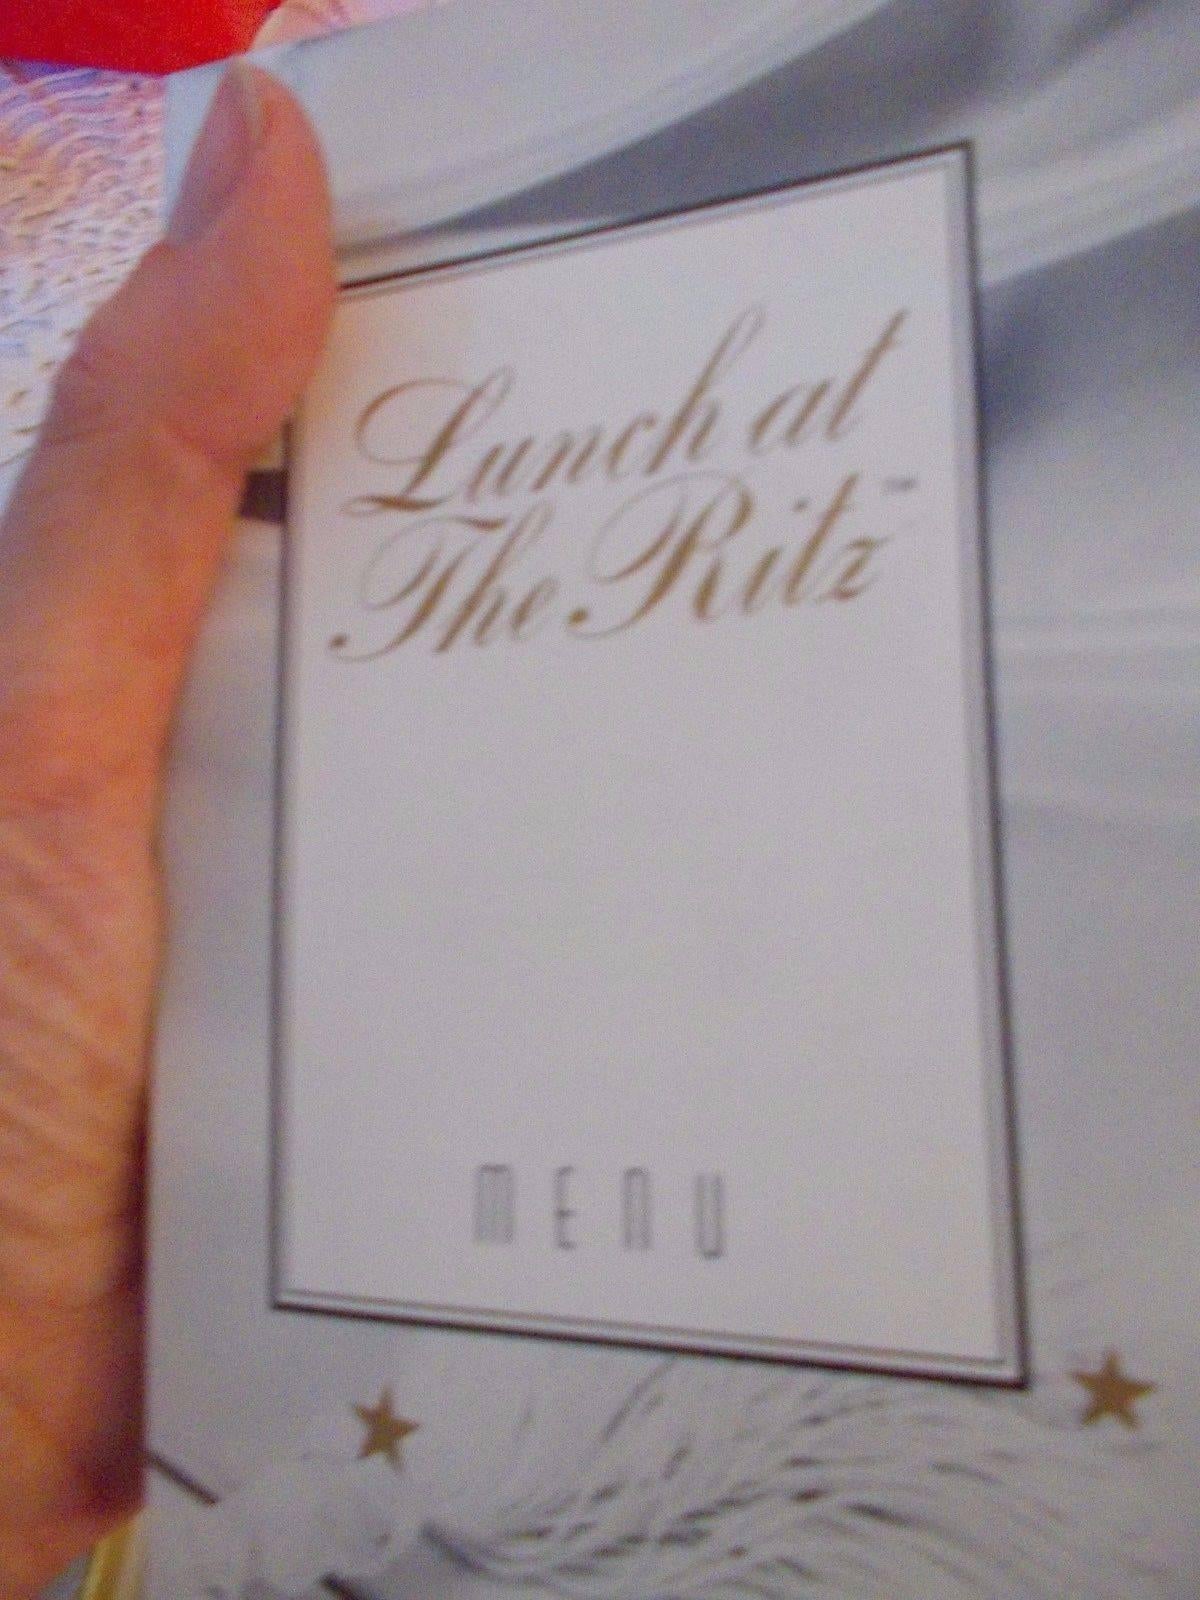 Rare Lunch At The Ritz "Hello, How Are You" Earrings On Original Menu Card
Exquisitely detailed Lunch at the Ritz Earrings titled, "Hello, How are you?" featuring stunning fun enameled phones, drippy ropes of rhinestones and